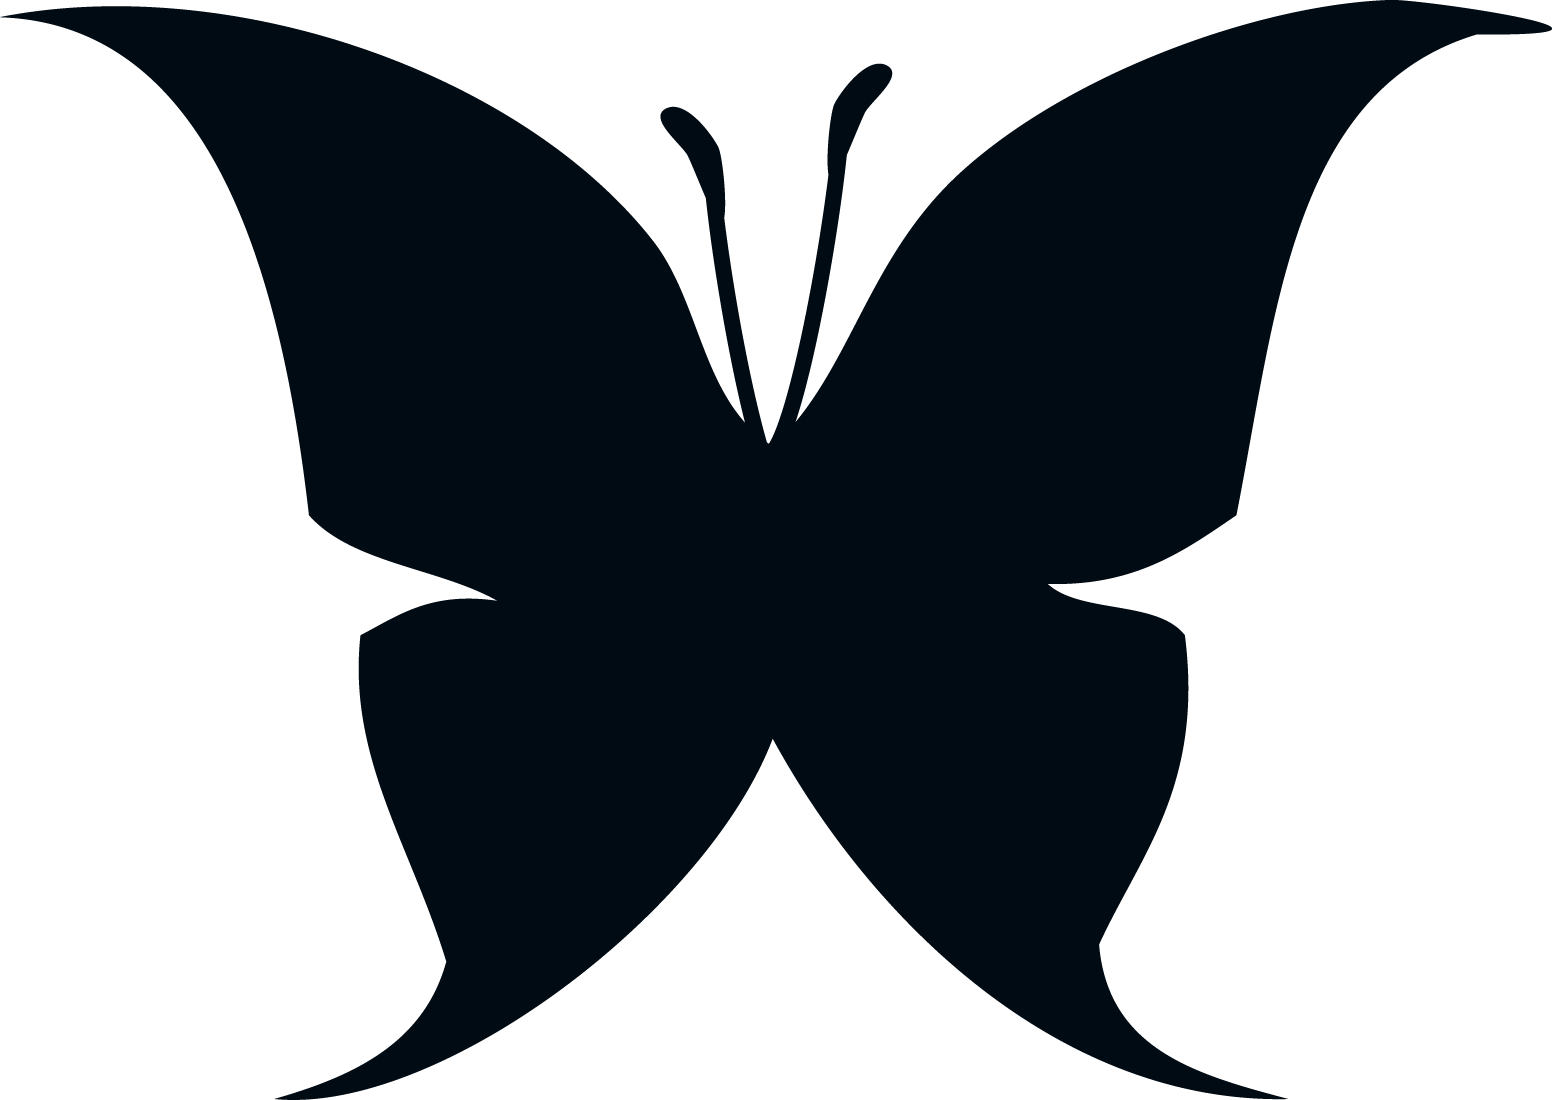 Butterfly Silhouette PNG - ClipArt Best